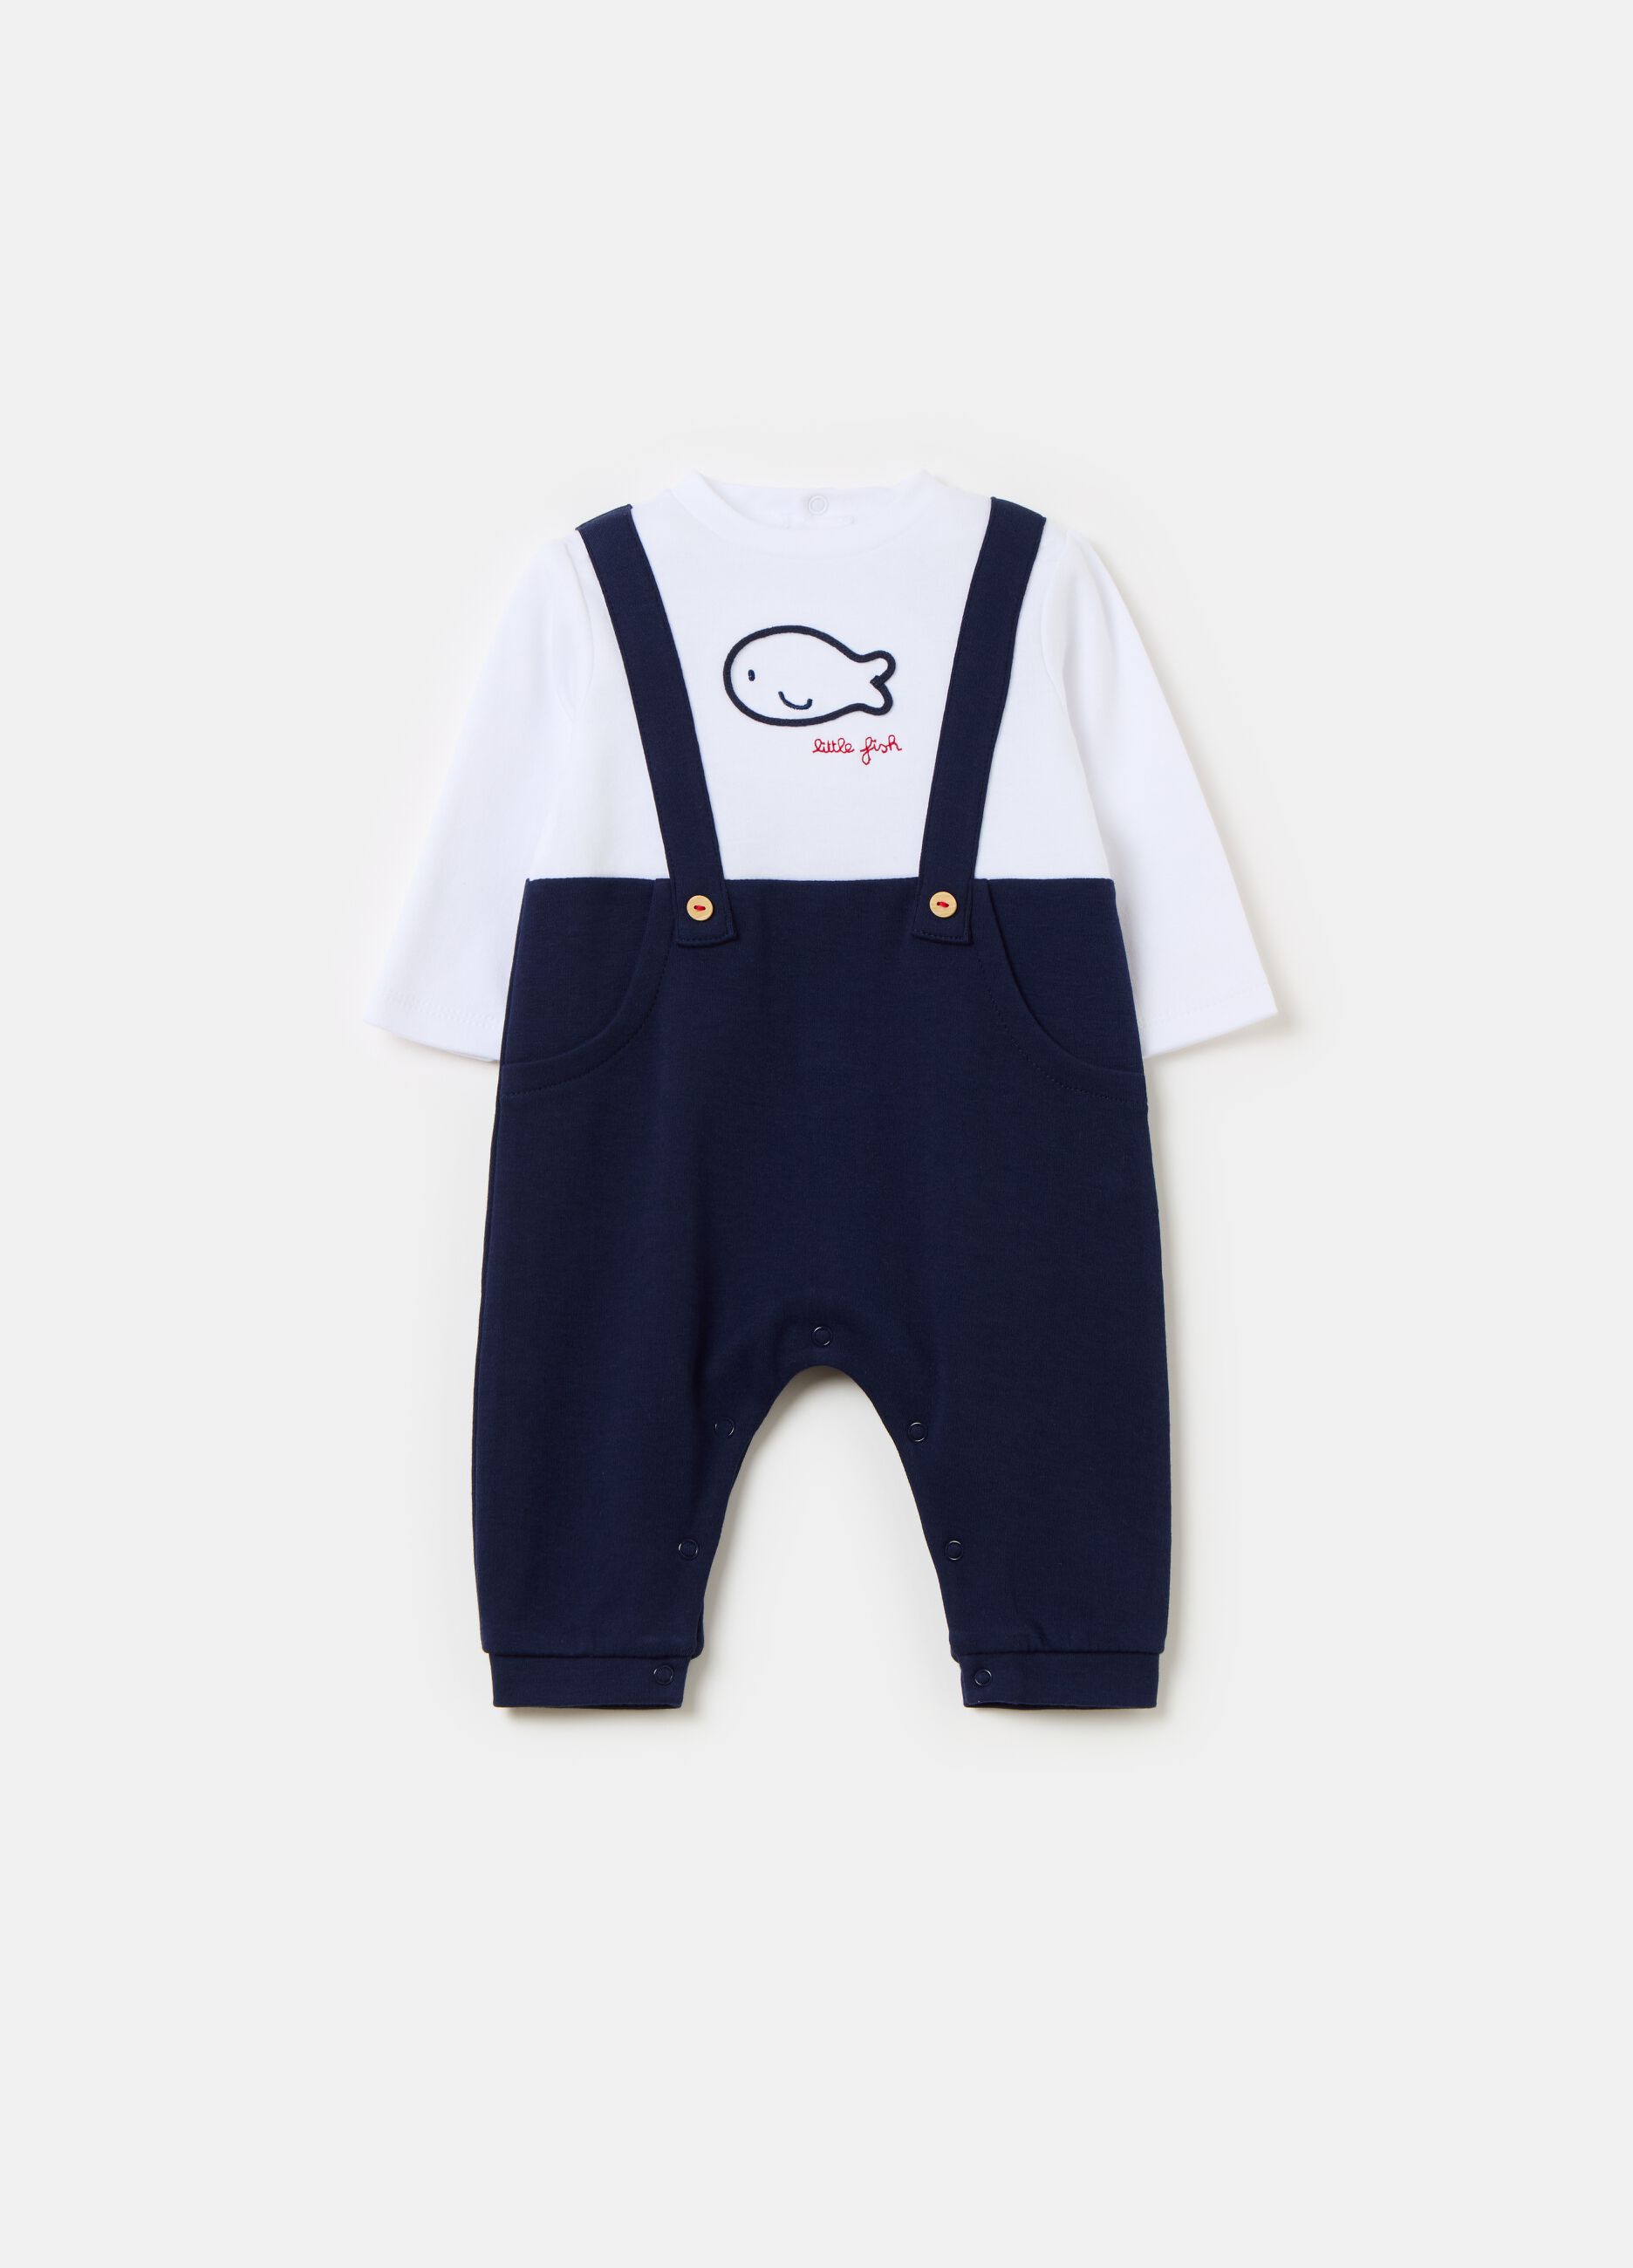 Organic cotton onesie with application